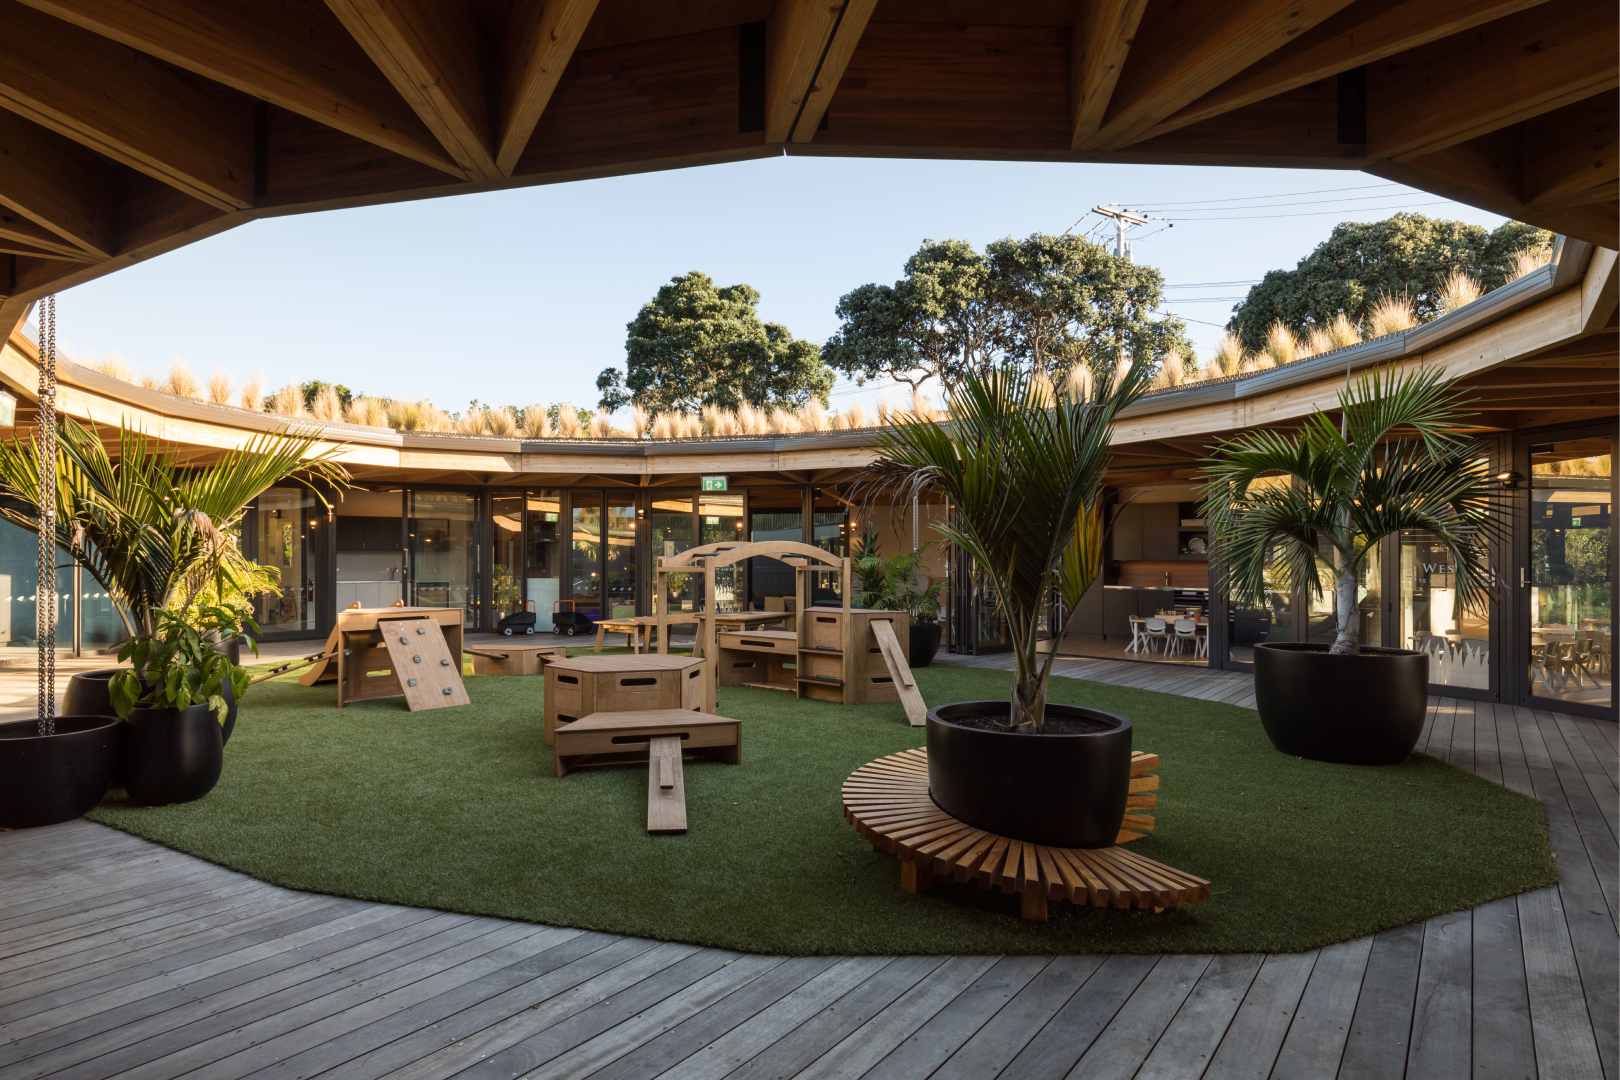 The outside playground area of the circular Kakapo Creek building